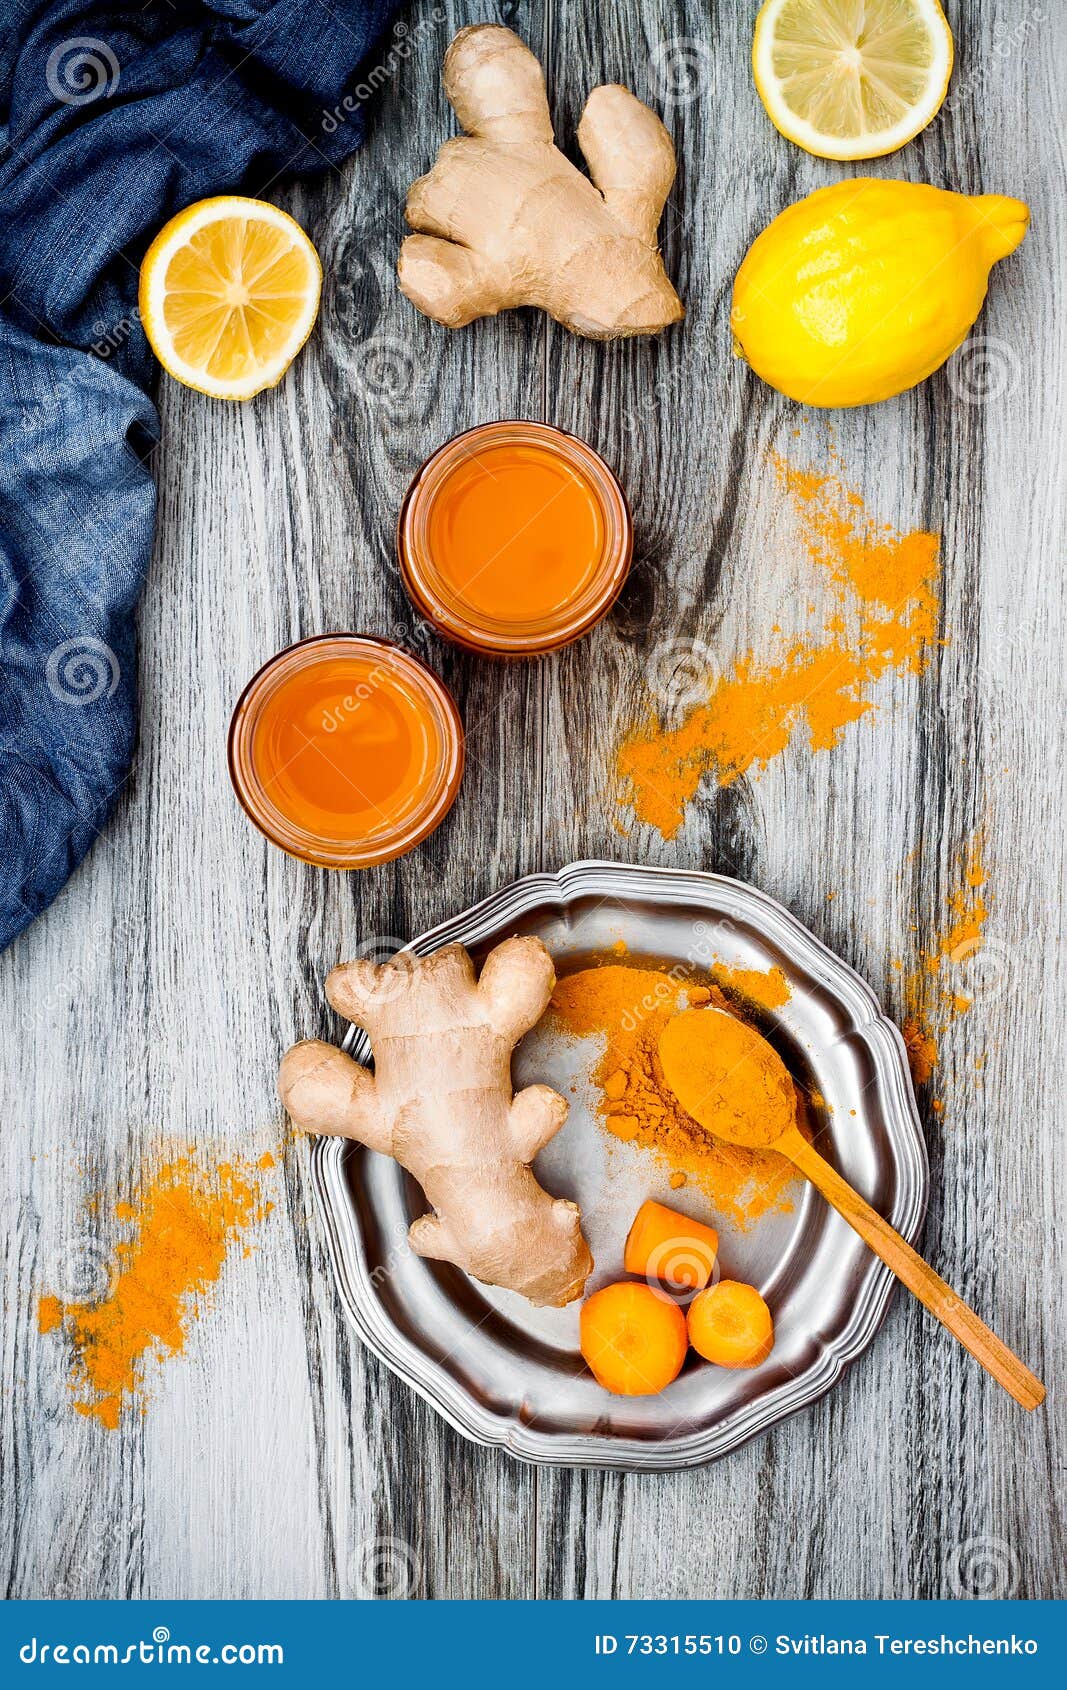 carrot ginger immune boosting, anti inflammatory smoothie with turmeric and honey. detox drink